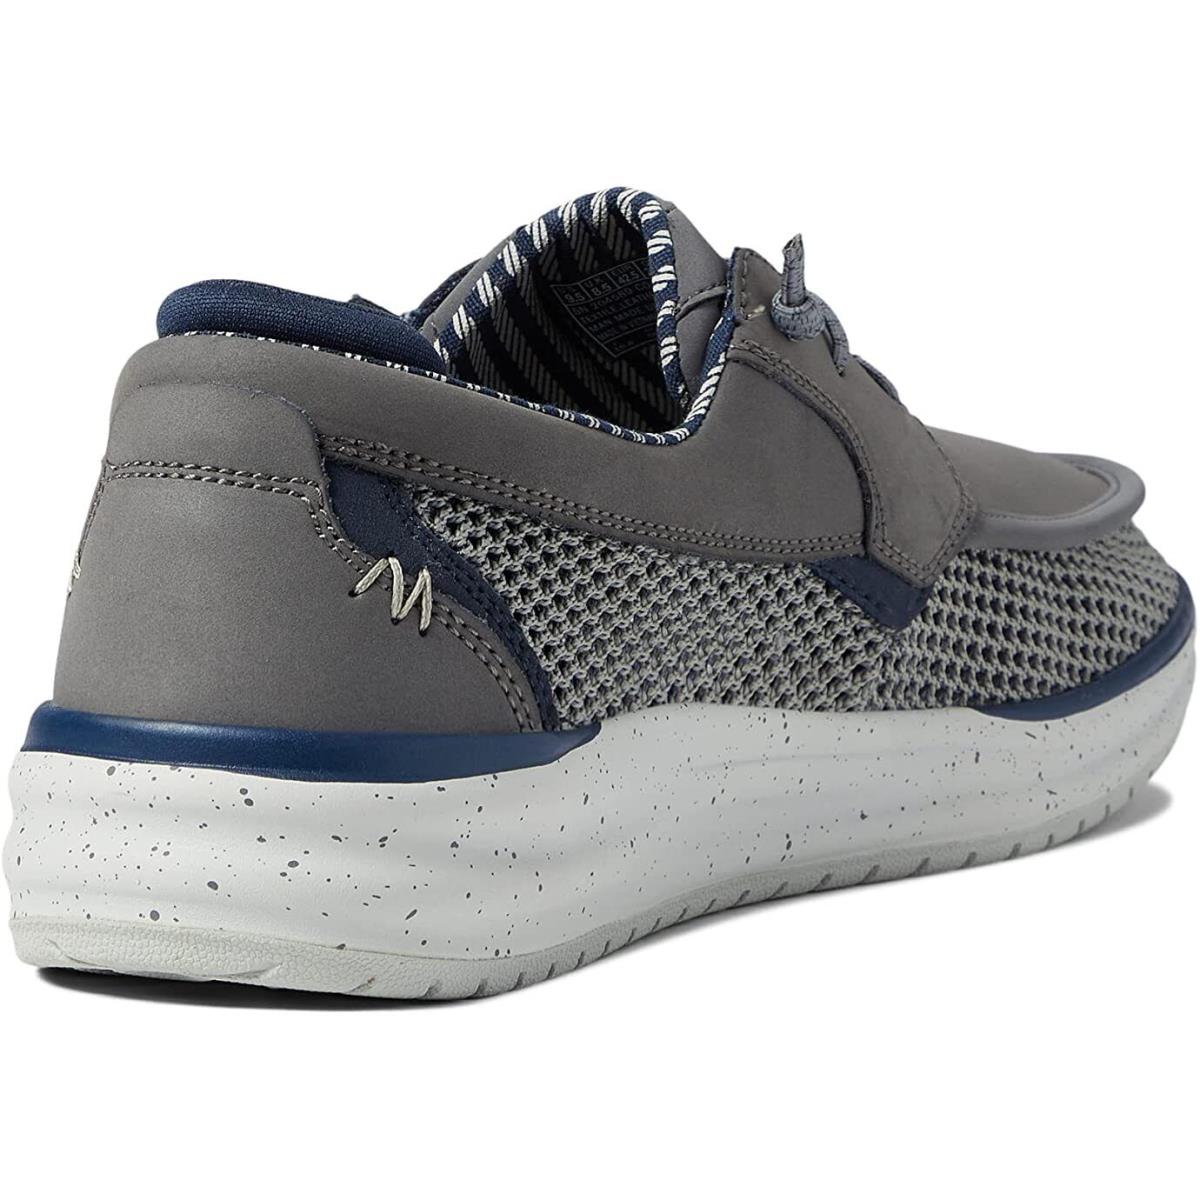 Skechers shoes Melo Waymer - Charcoal 3